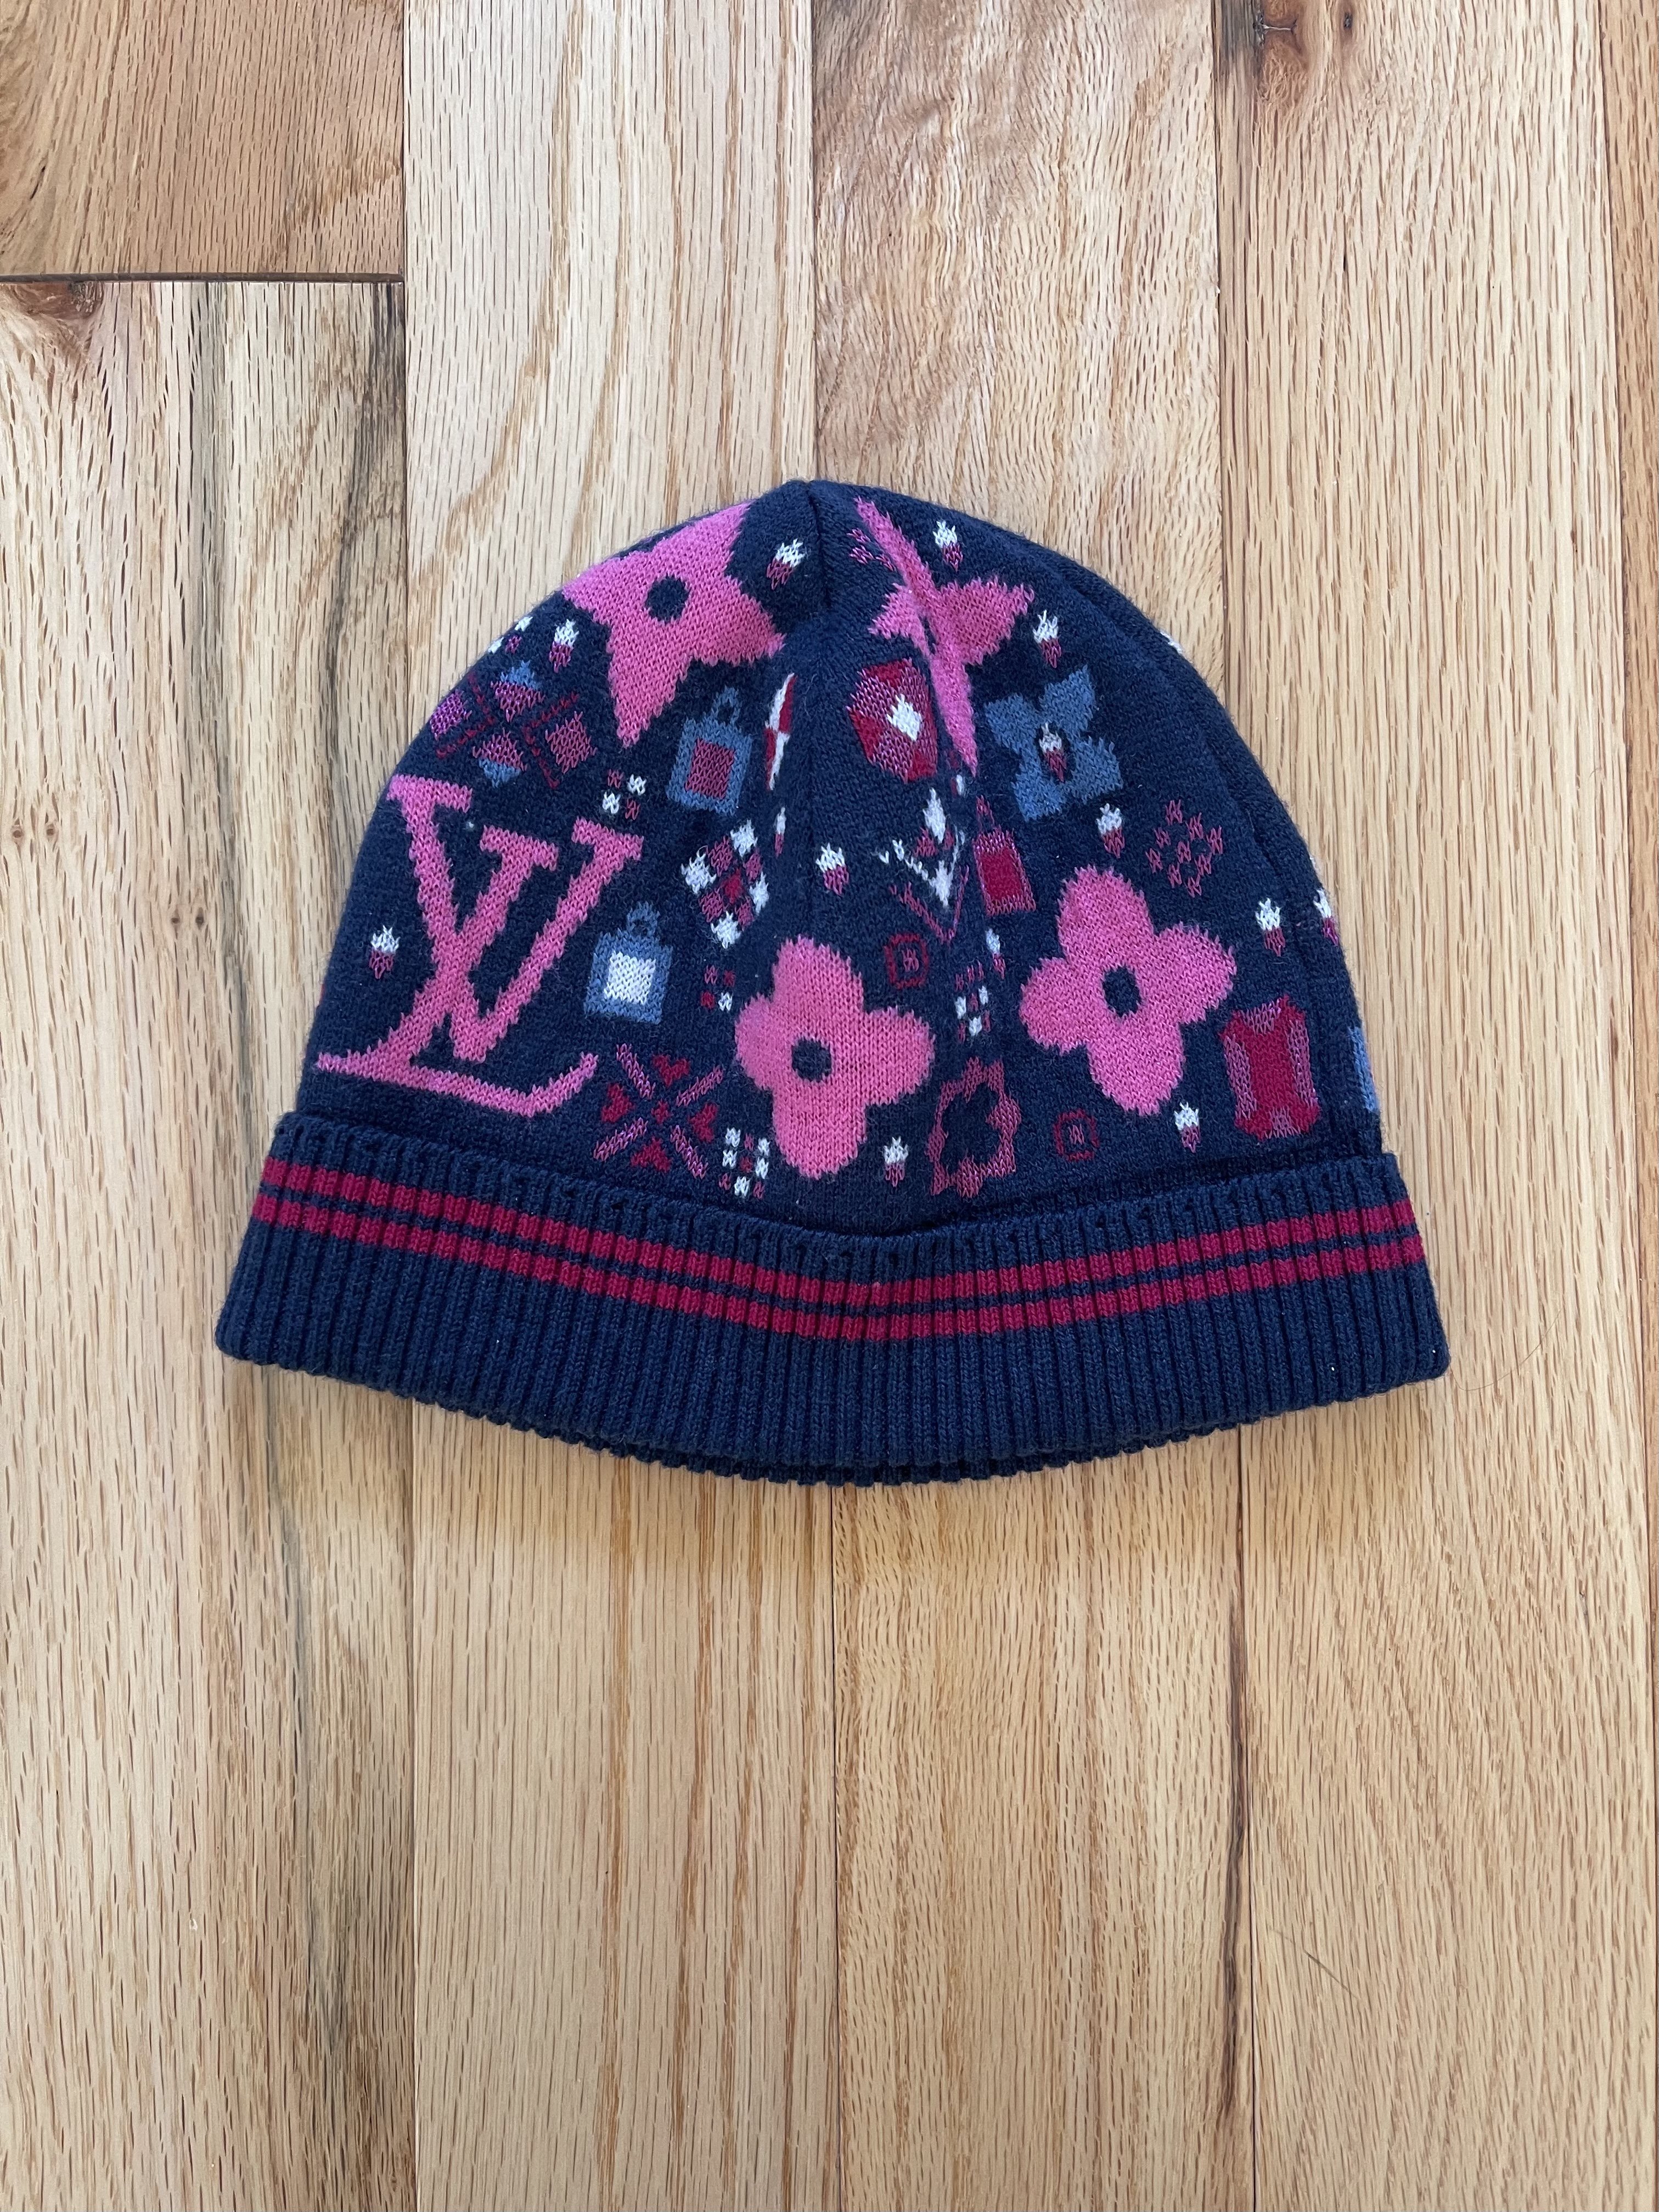 Louis Vuitton by Marc Jacobs Wool Beanie  Reissue: Buy & Sell Designer,  Streetwear & Vintage Clothing for Men & Women